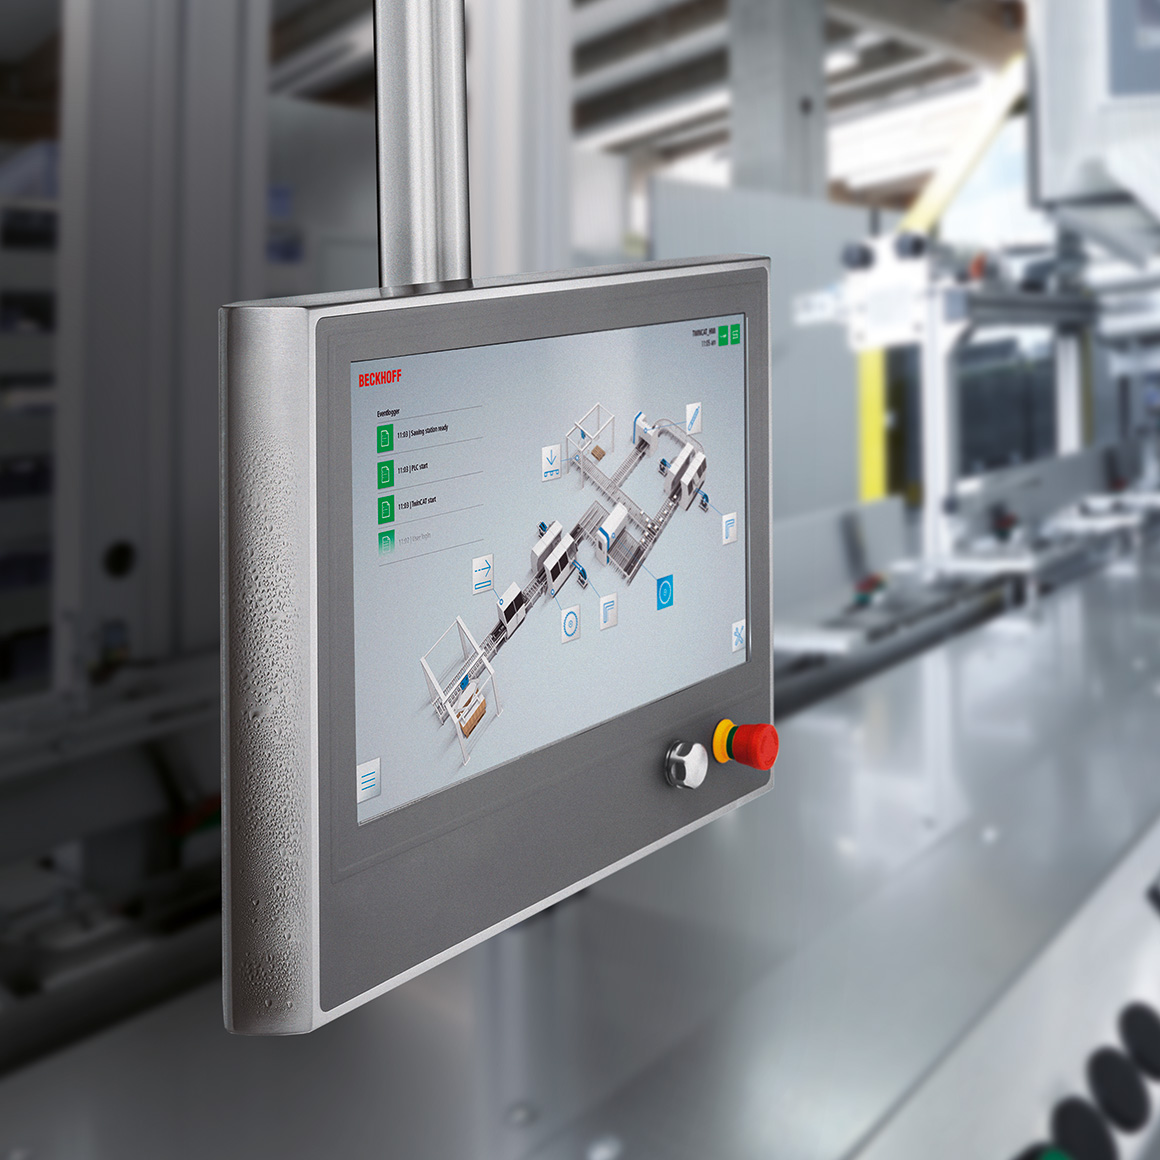 Control Panels in special stainless steel housings are used in the most demanding environments, such as the food, beverage and pharmaceutical industries. 